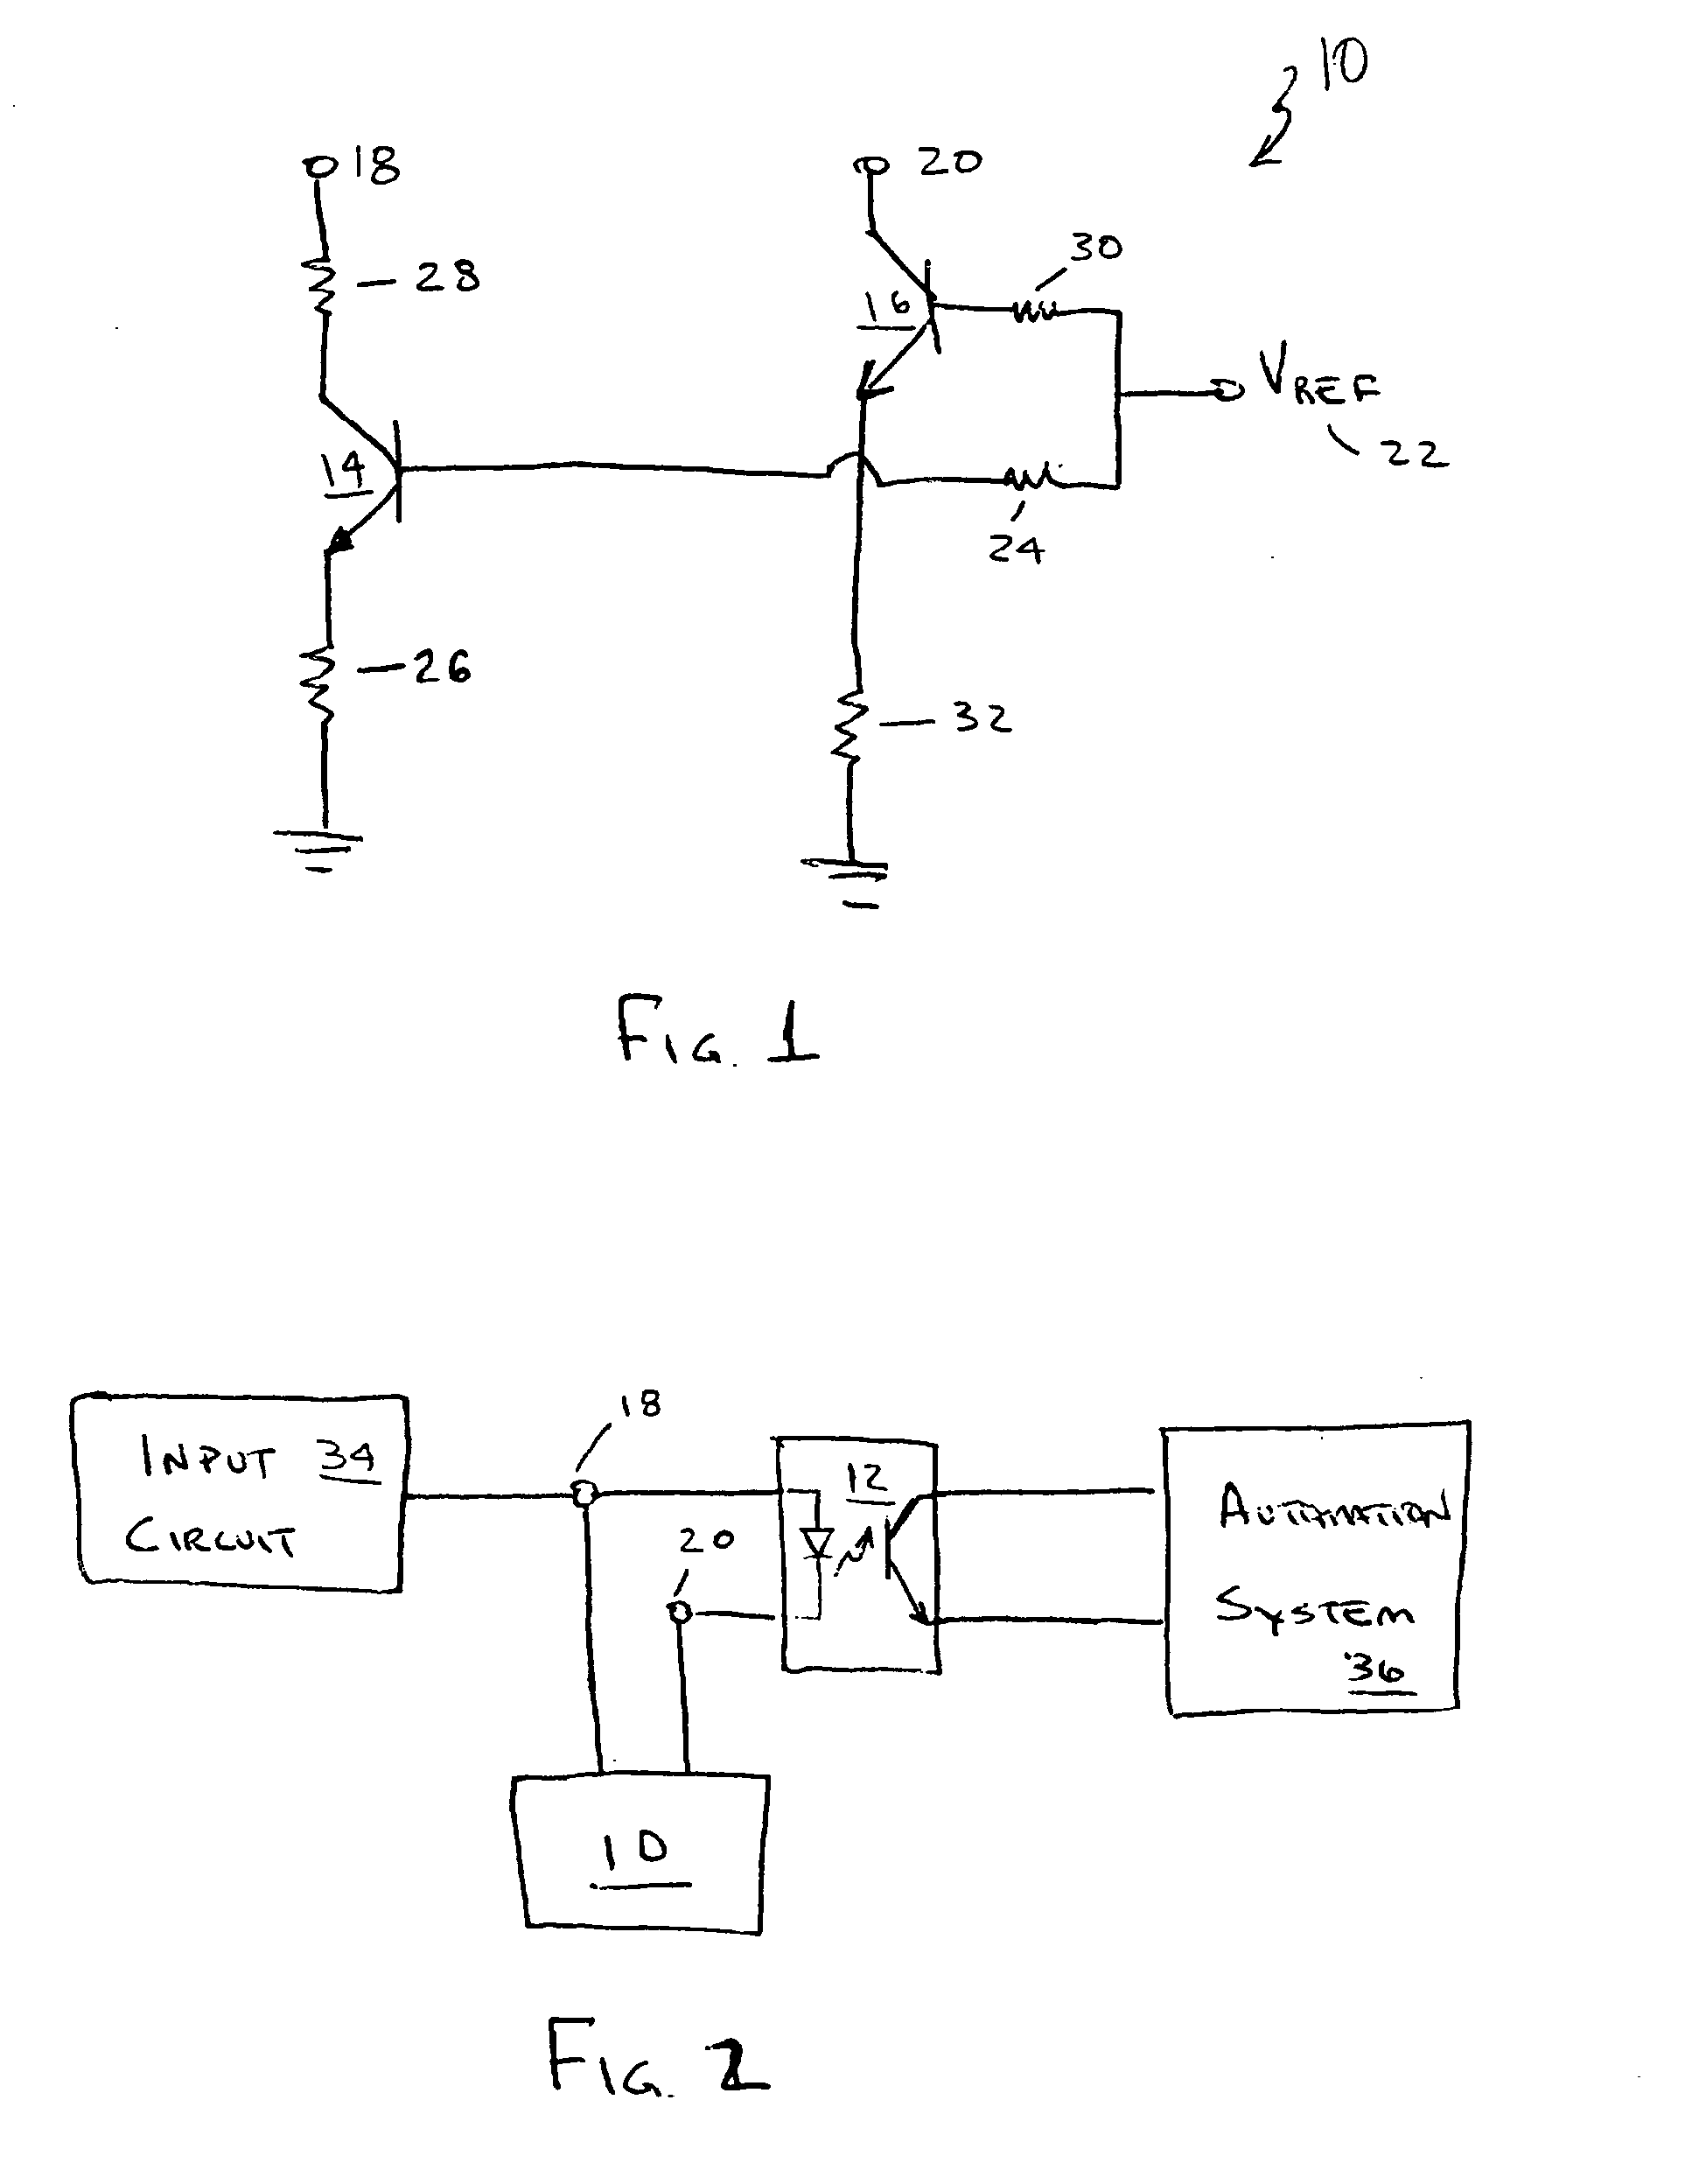 Dual current-source digital-input circuit for an industrial automation system